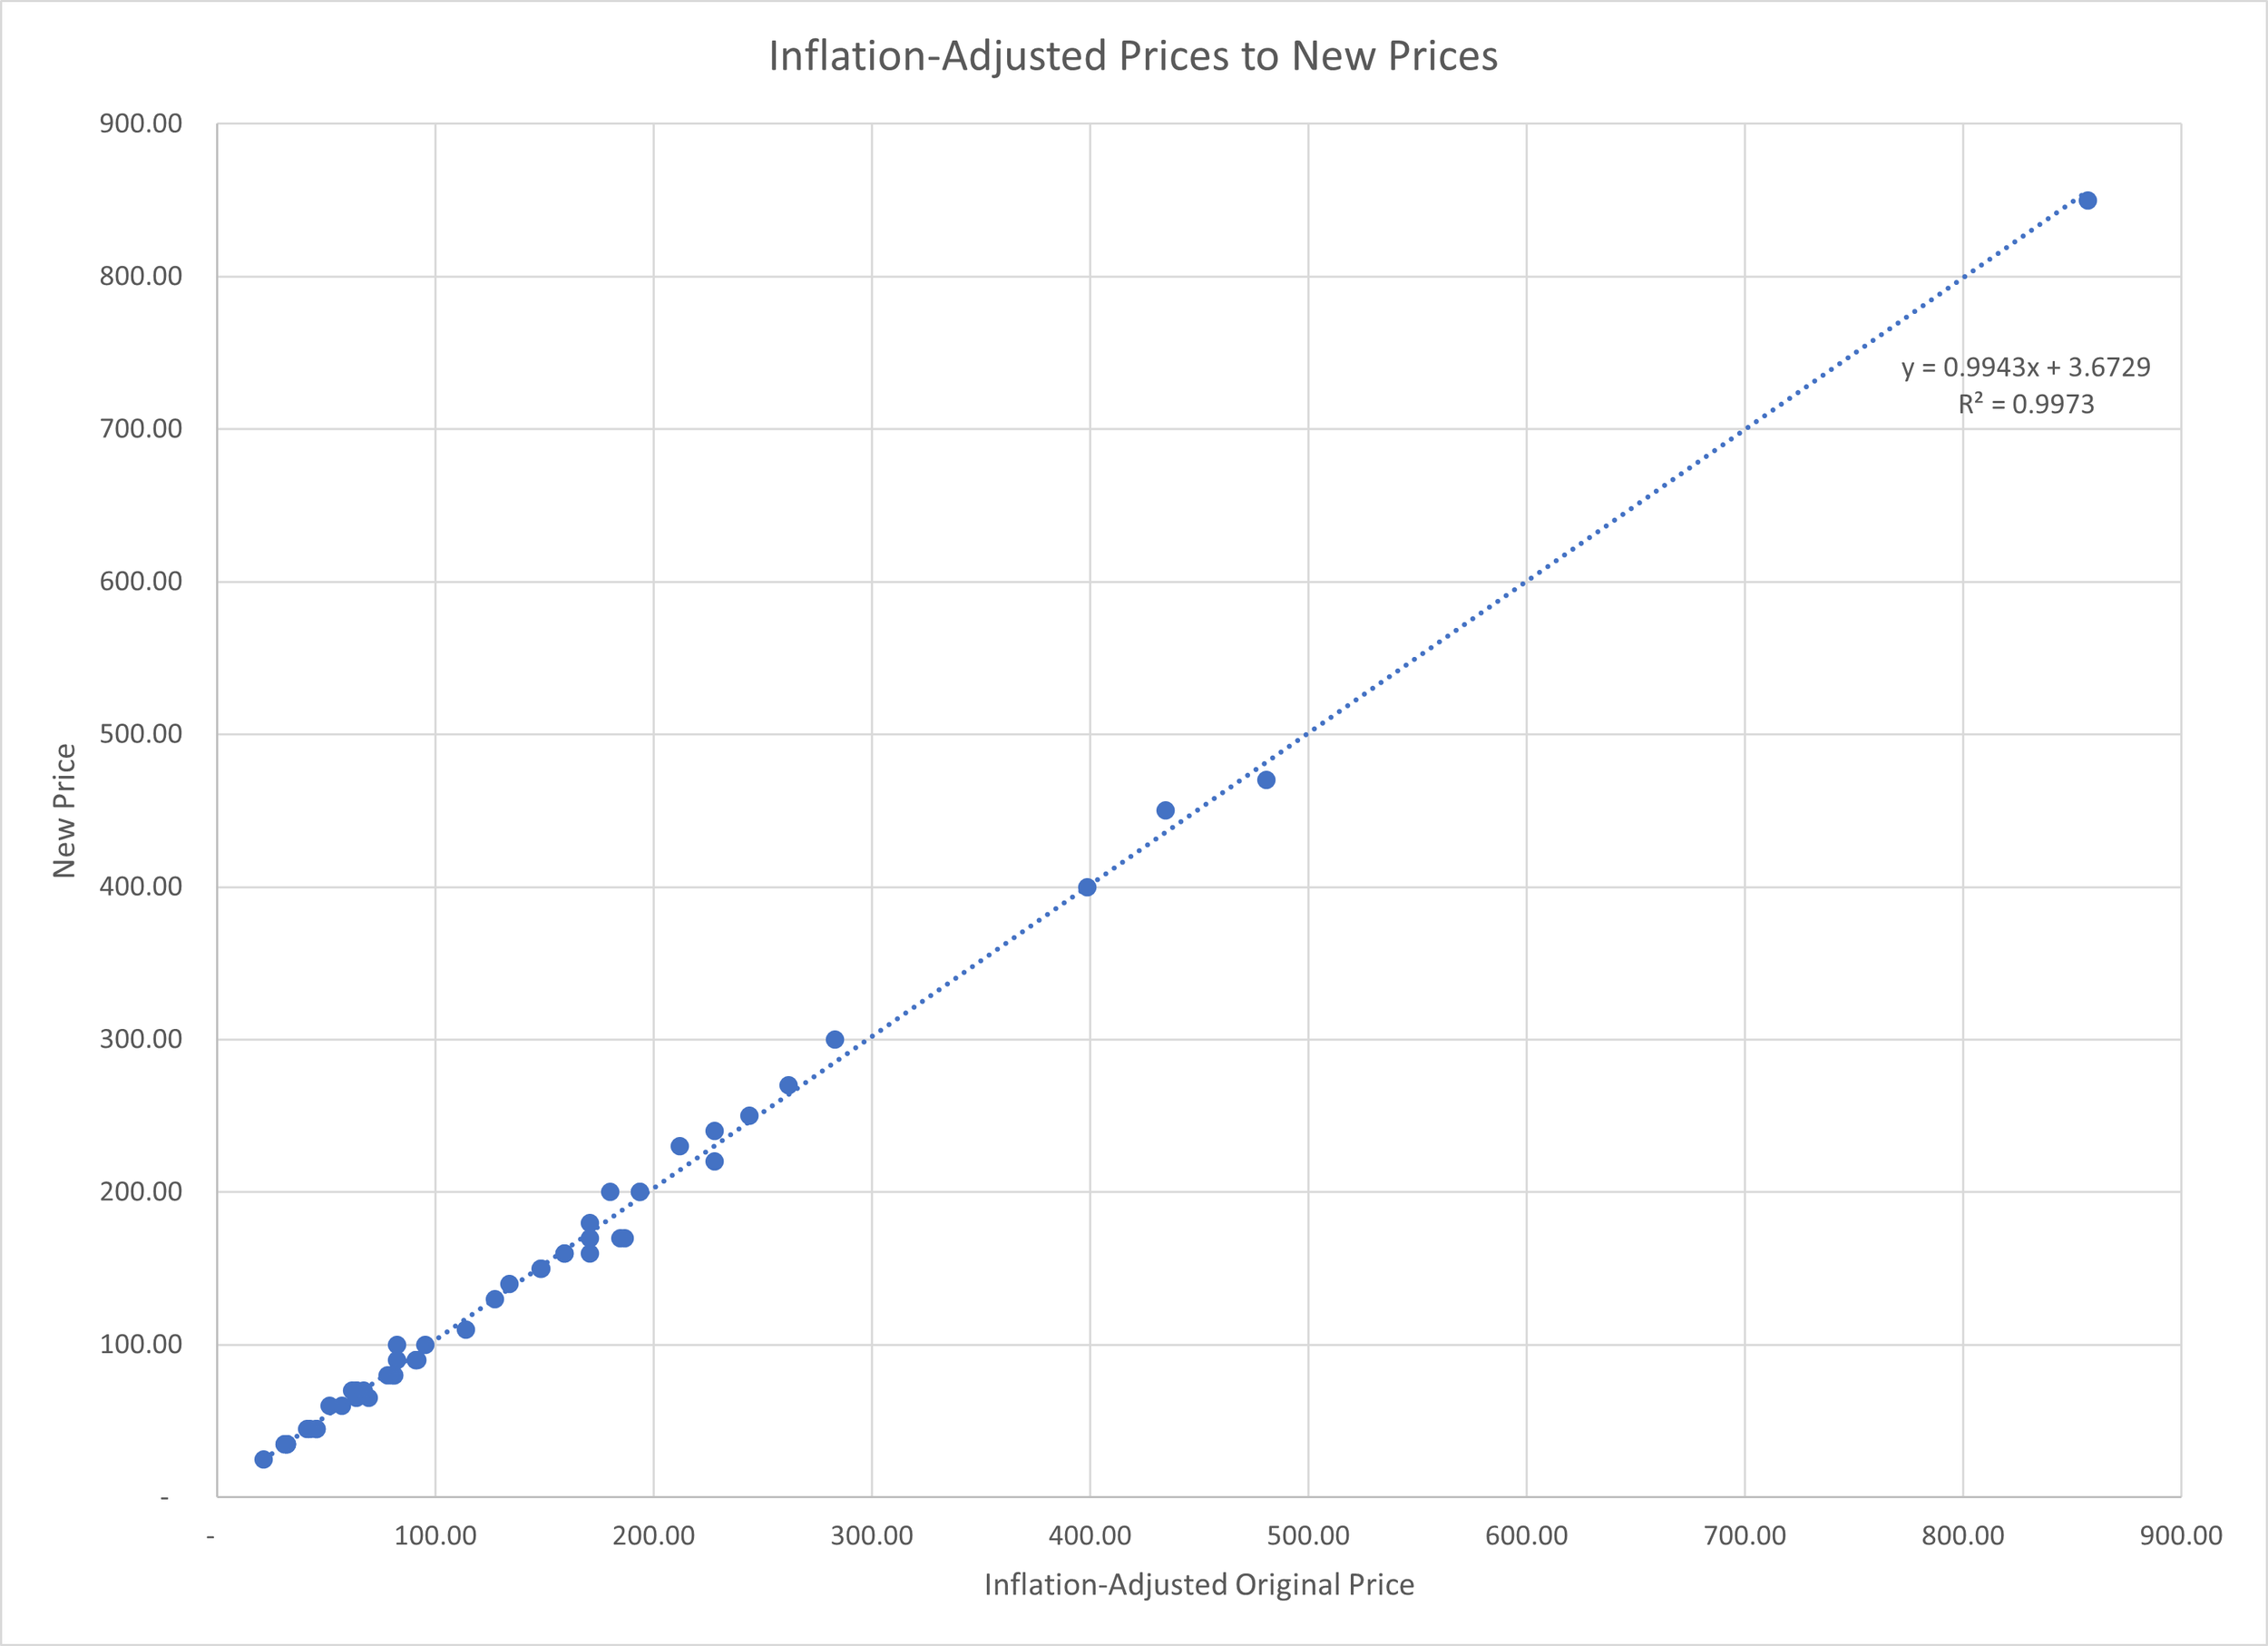 Greed or Inflation? An Economic Analysis LEGO Price Increases - BrickNerd - things LEGO and LEGO fan community